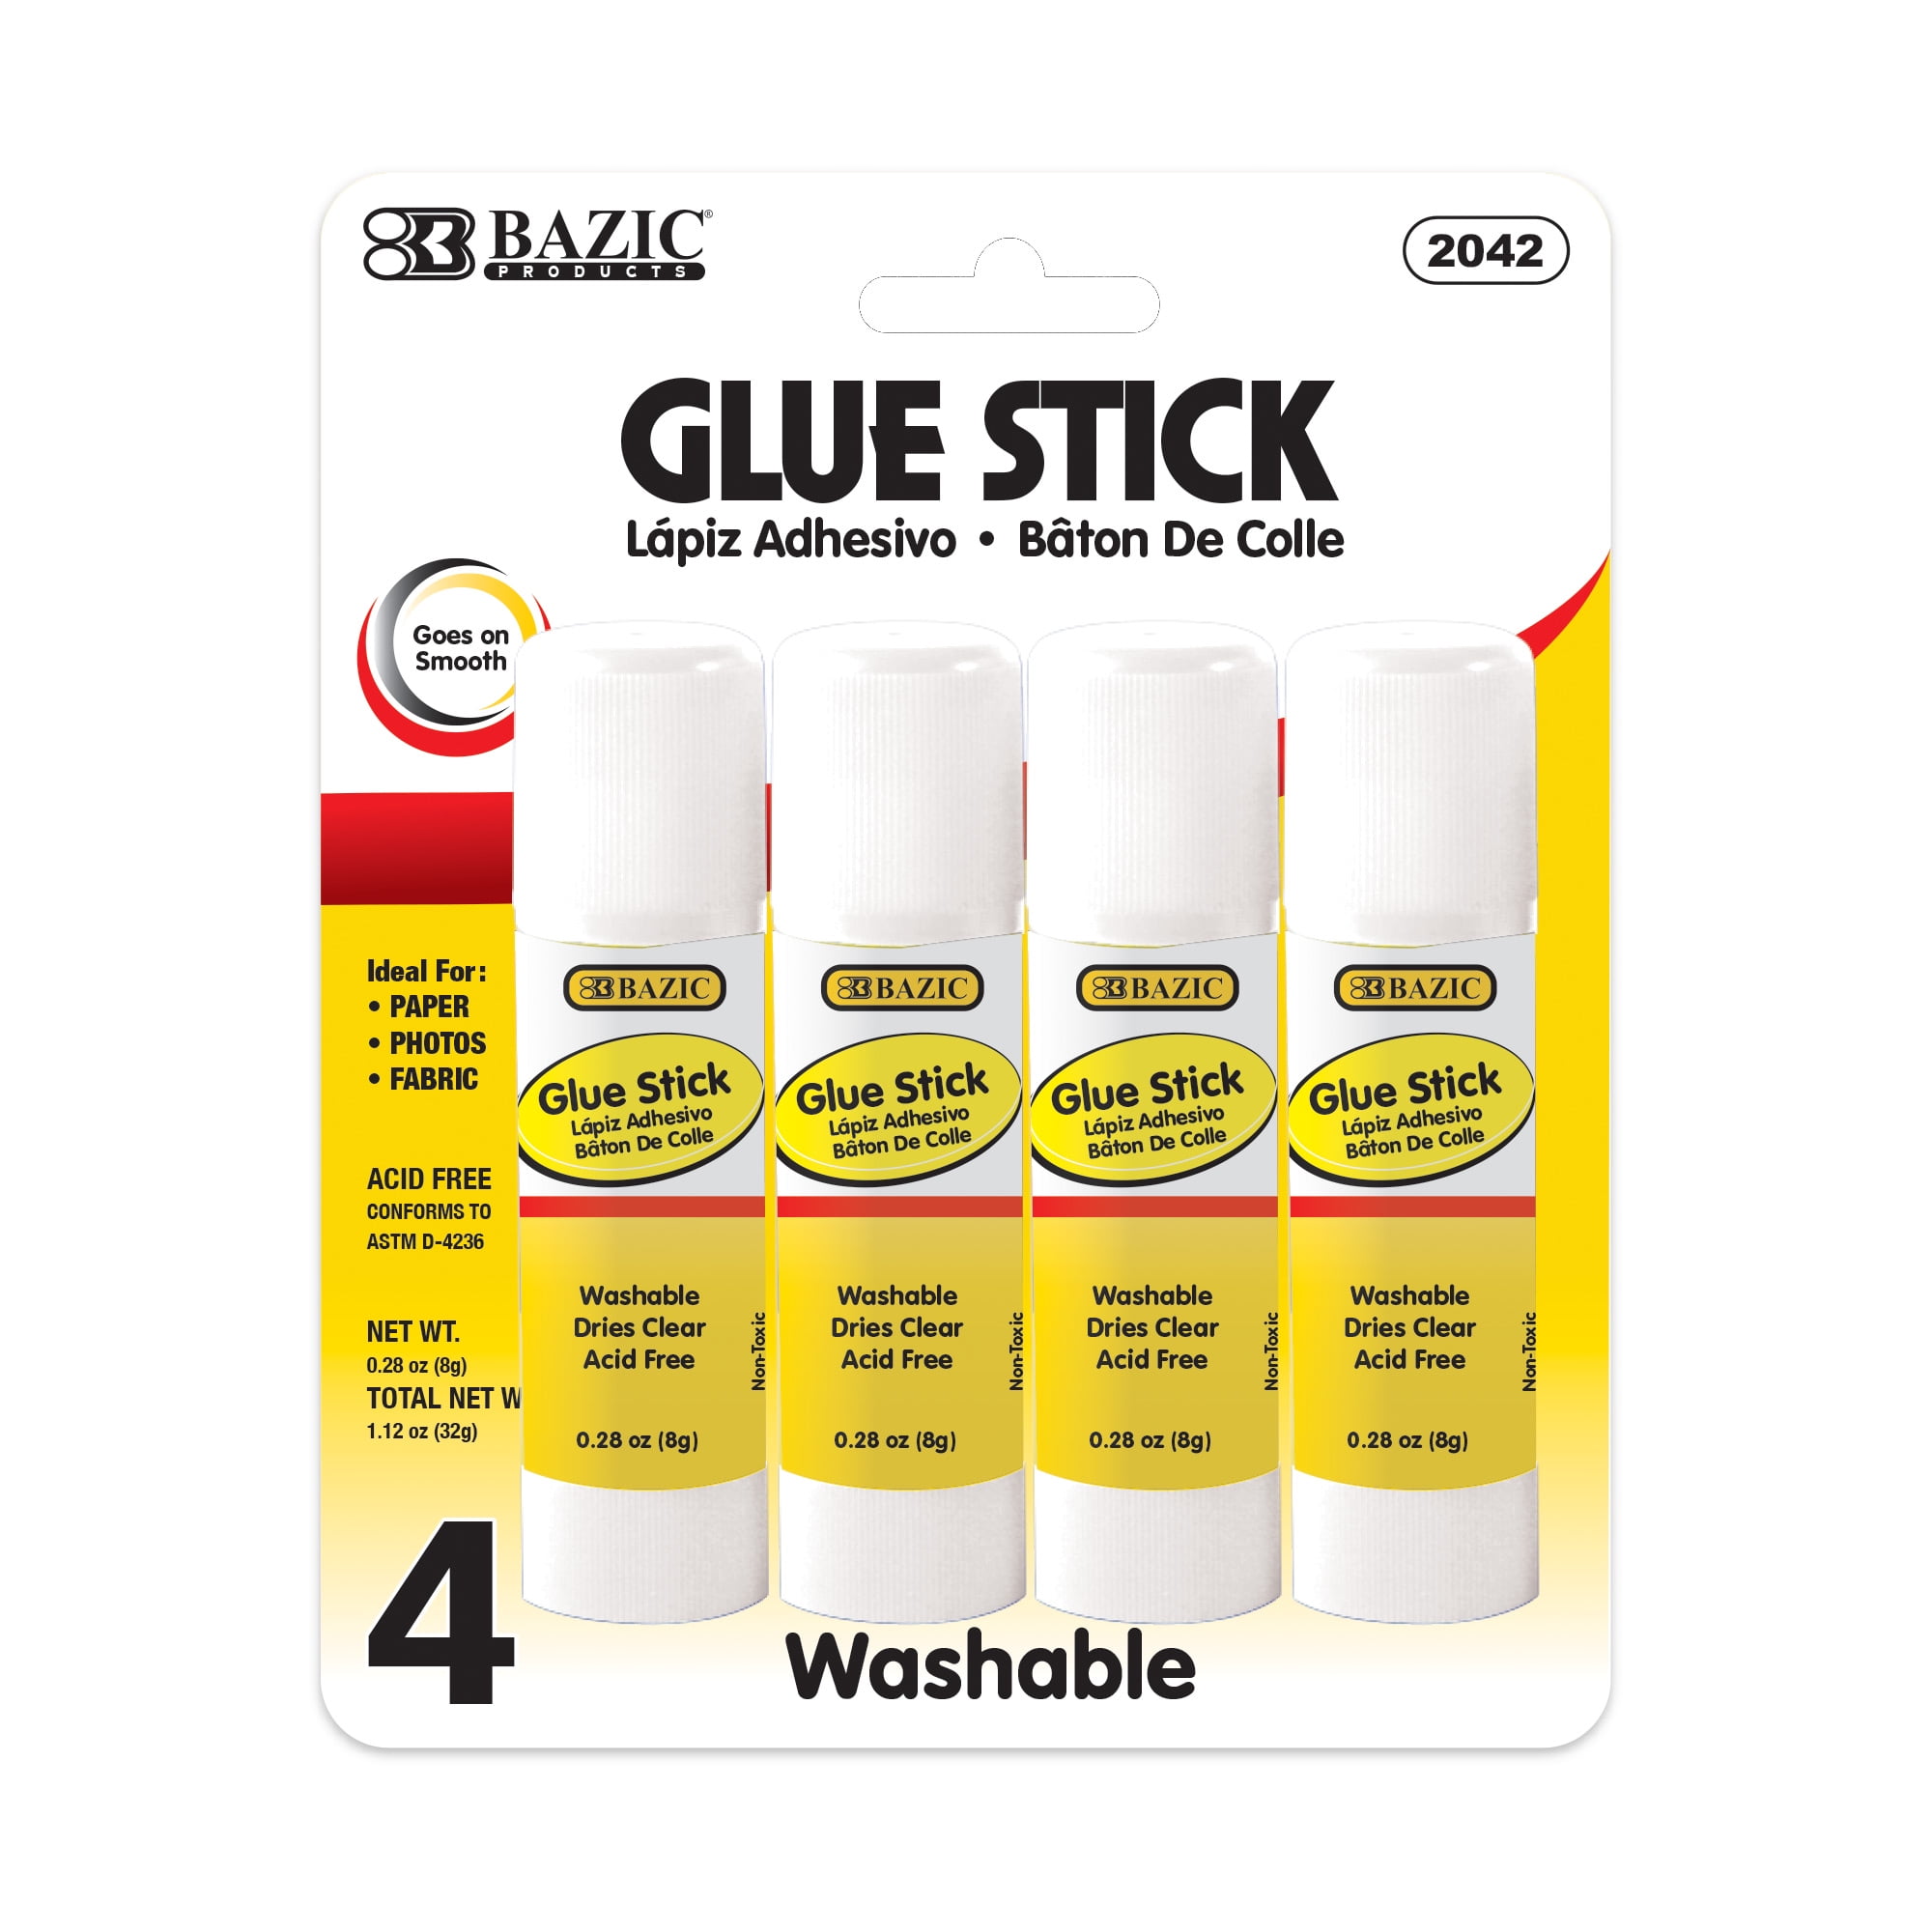 BAZIC White Glue 4 Oz. (118 mL), All Purpose Adhesive Bond Photo DIY Craft  Slime Making, for Office School Home Art Projects, 1-Pack